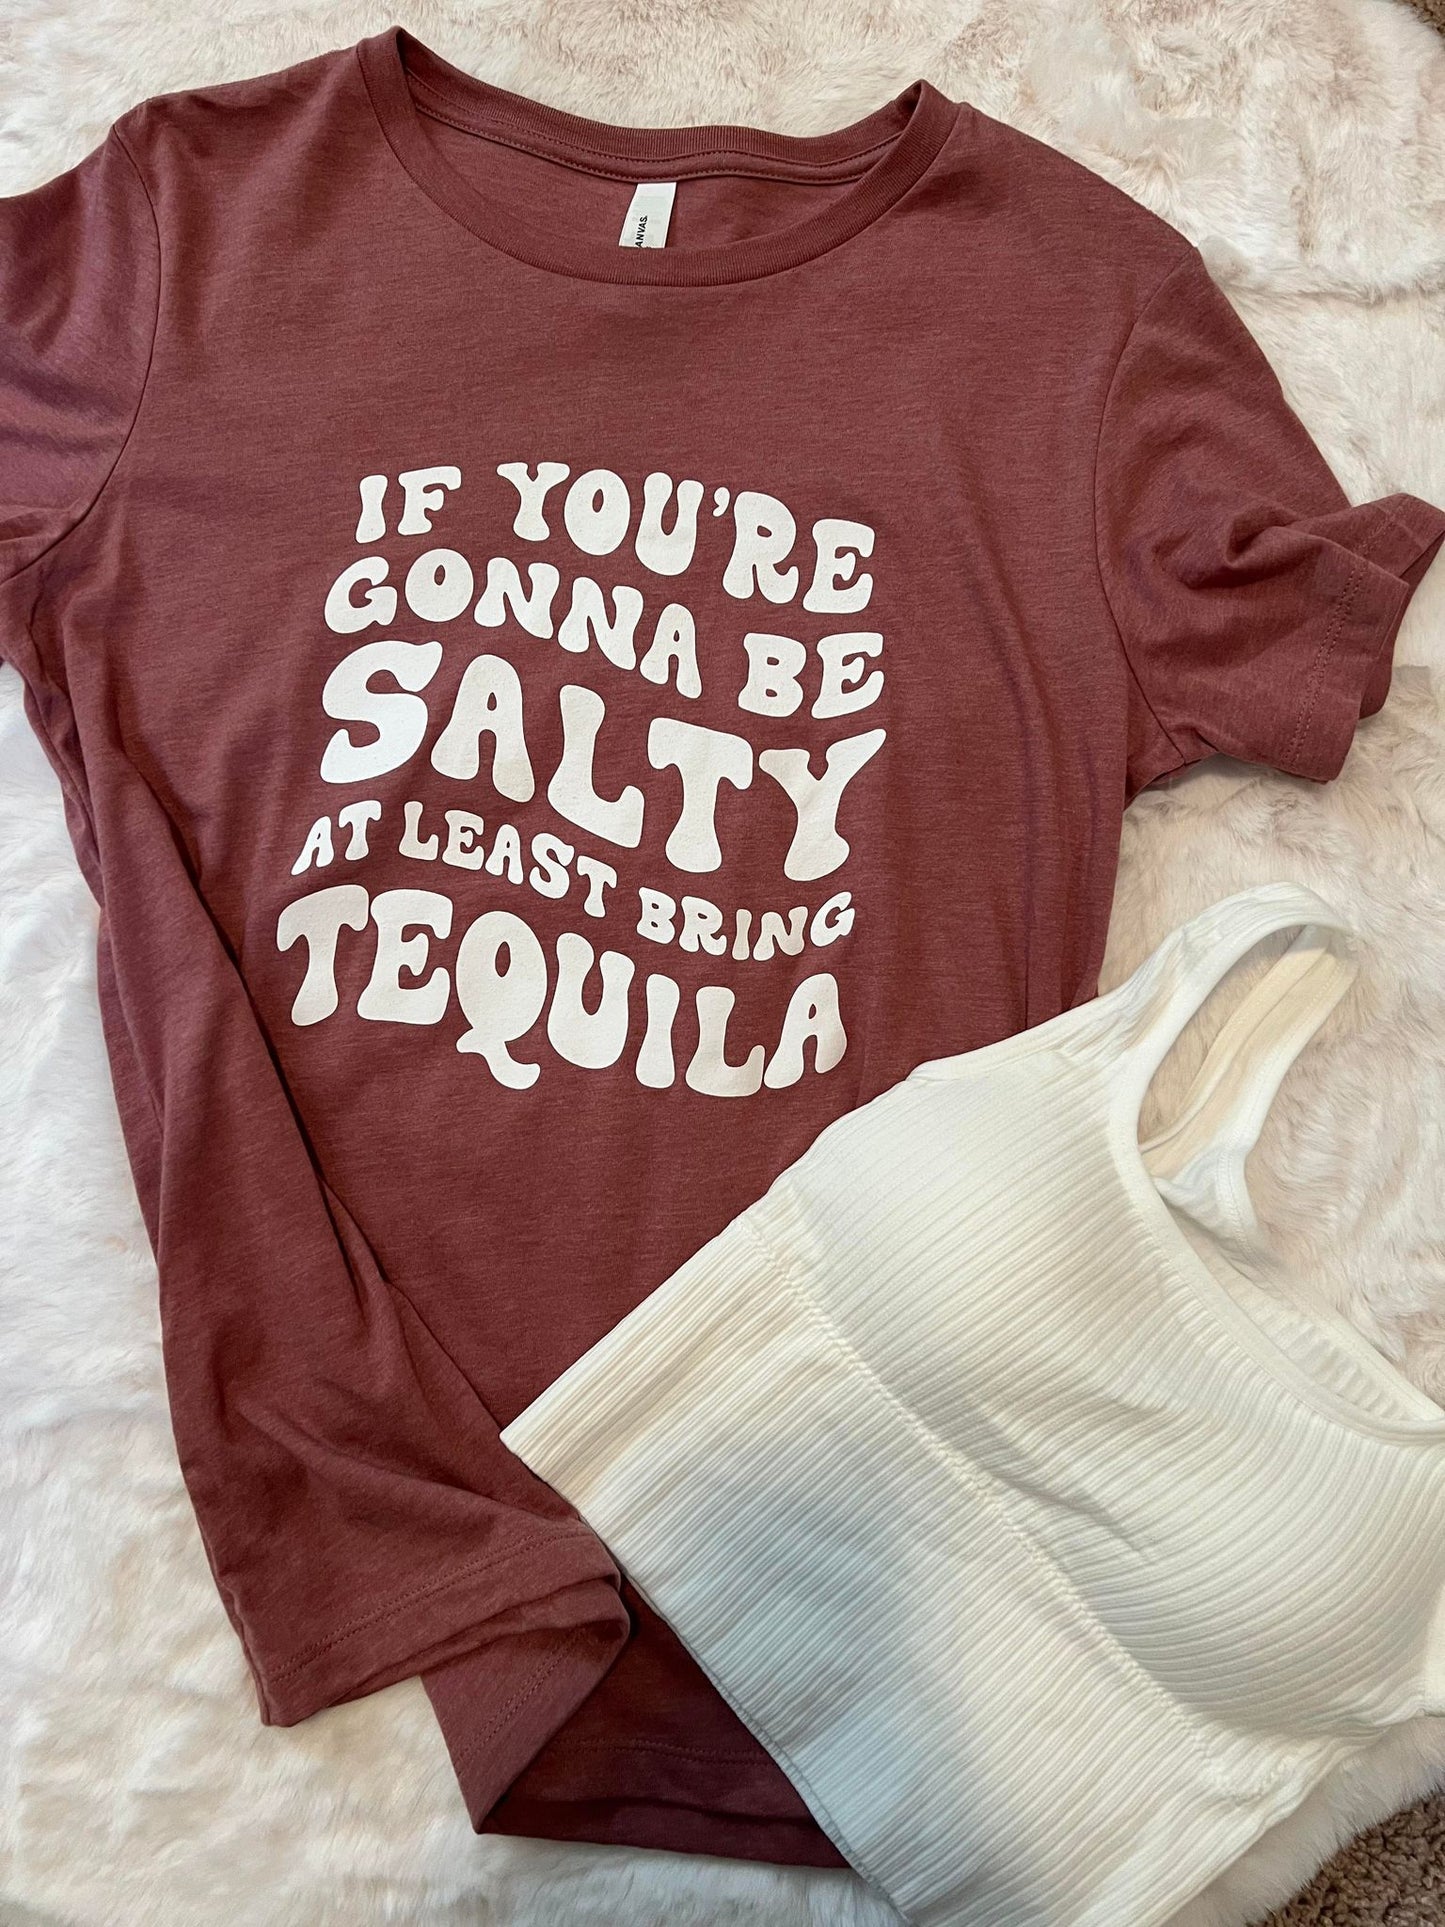 Salty Graphic Tee